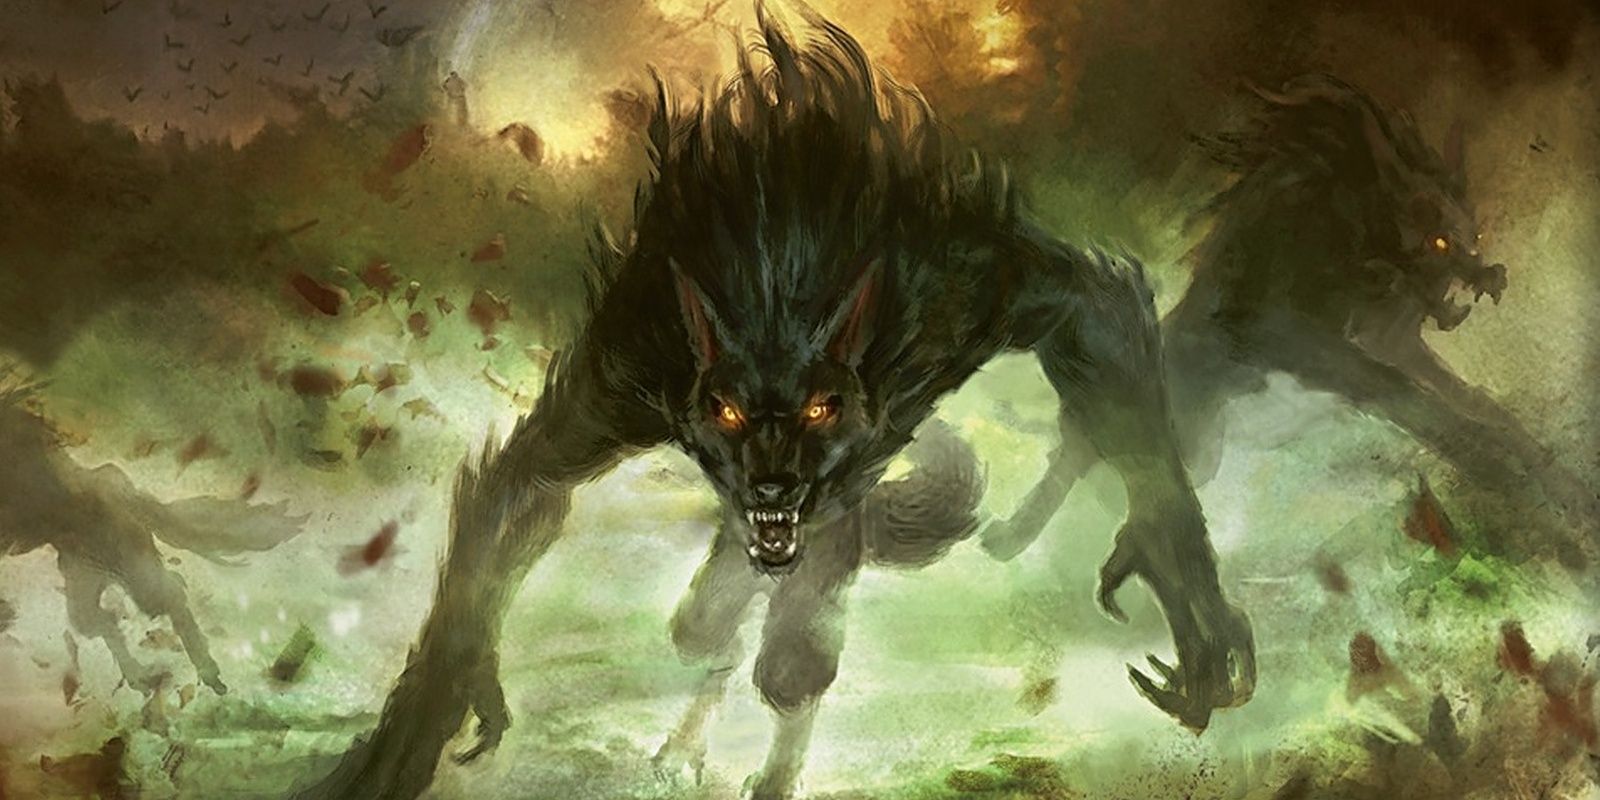 innistrad werewolves charging at night